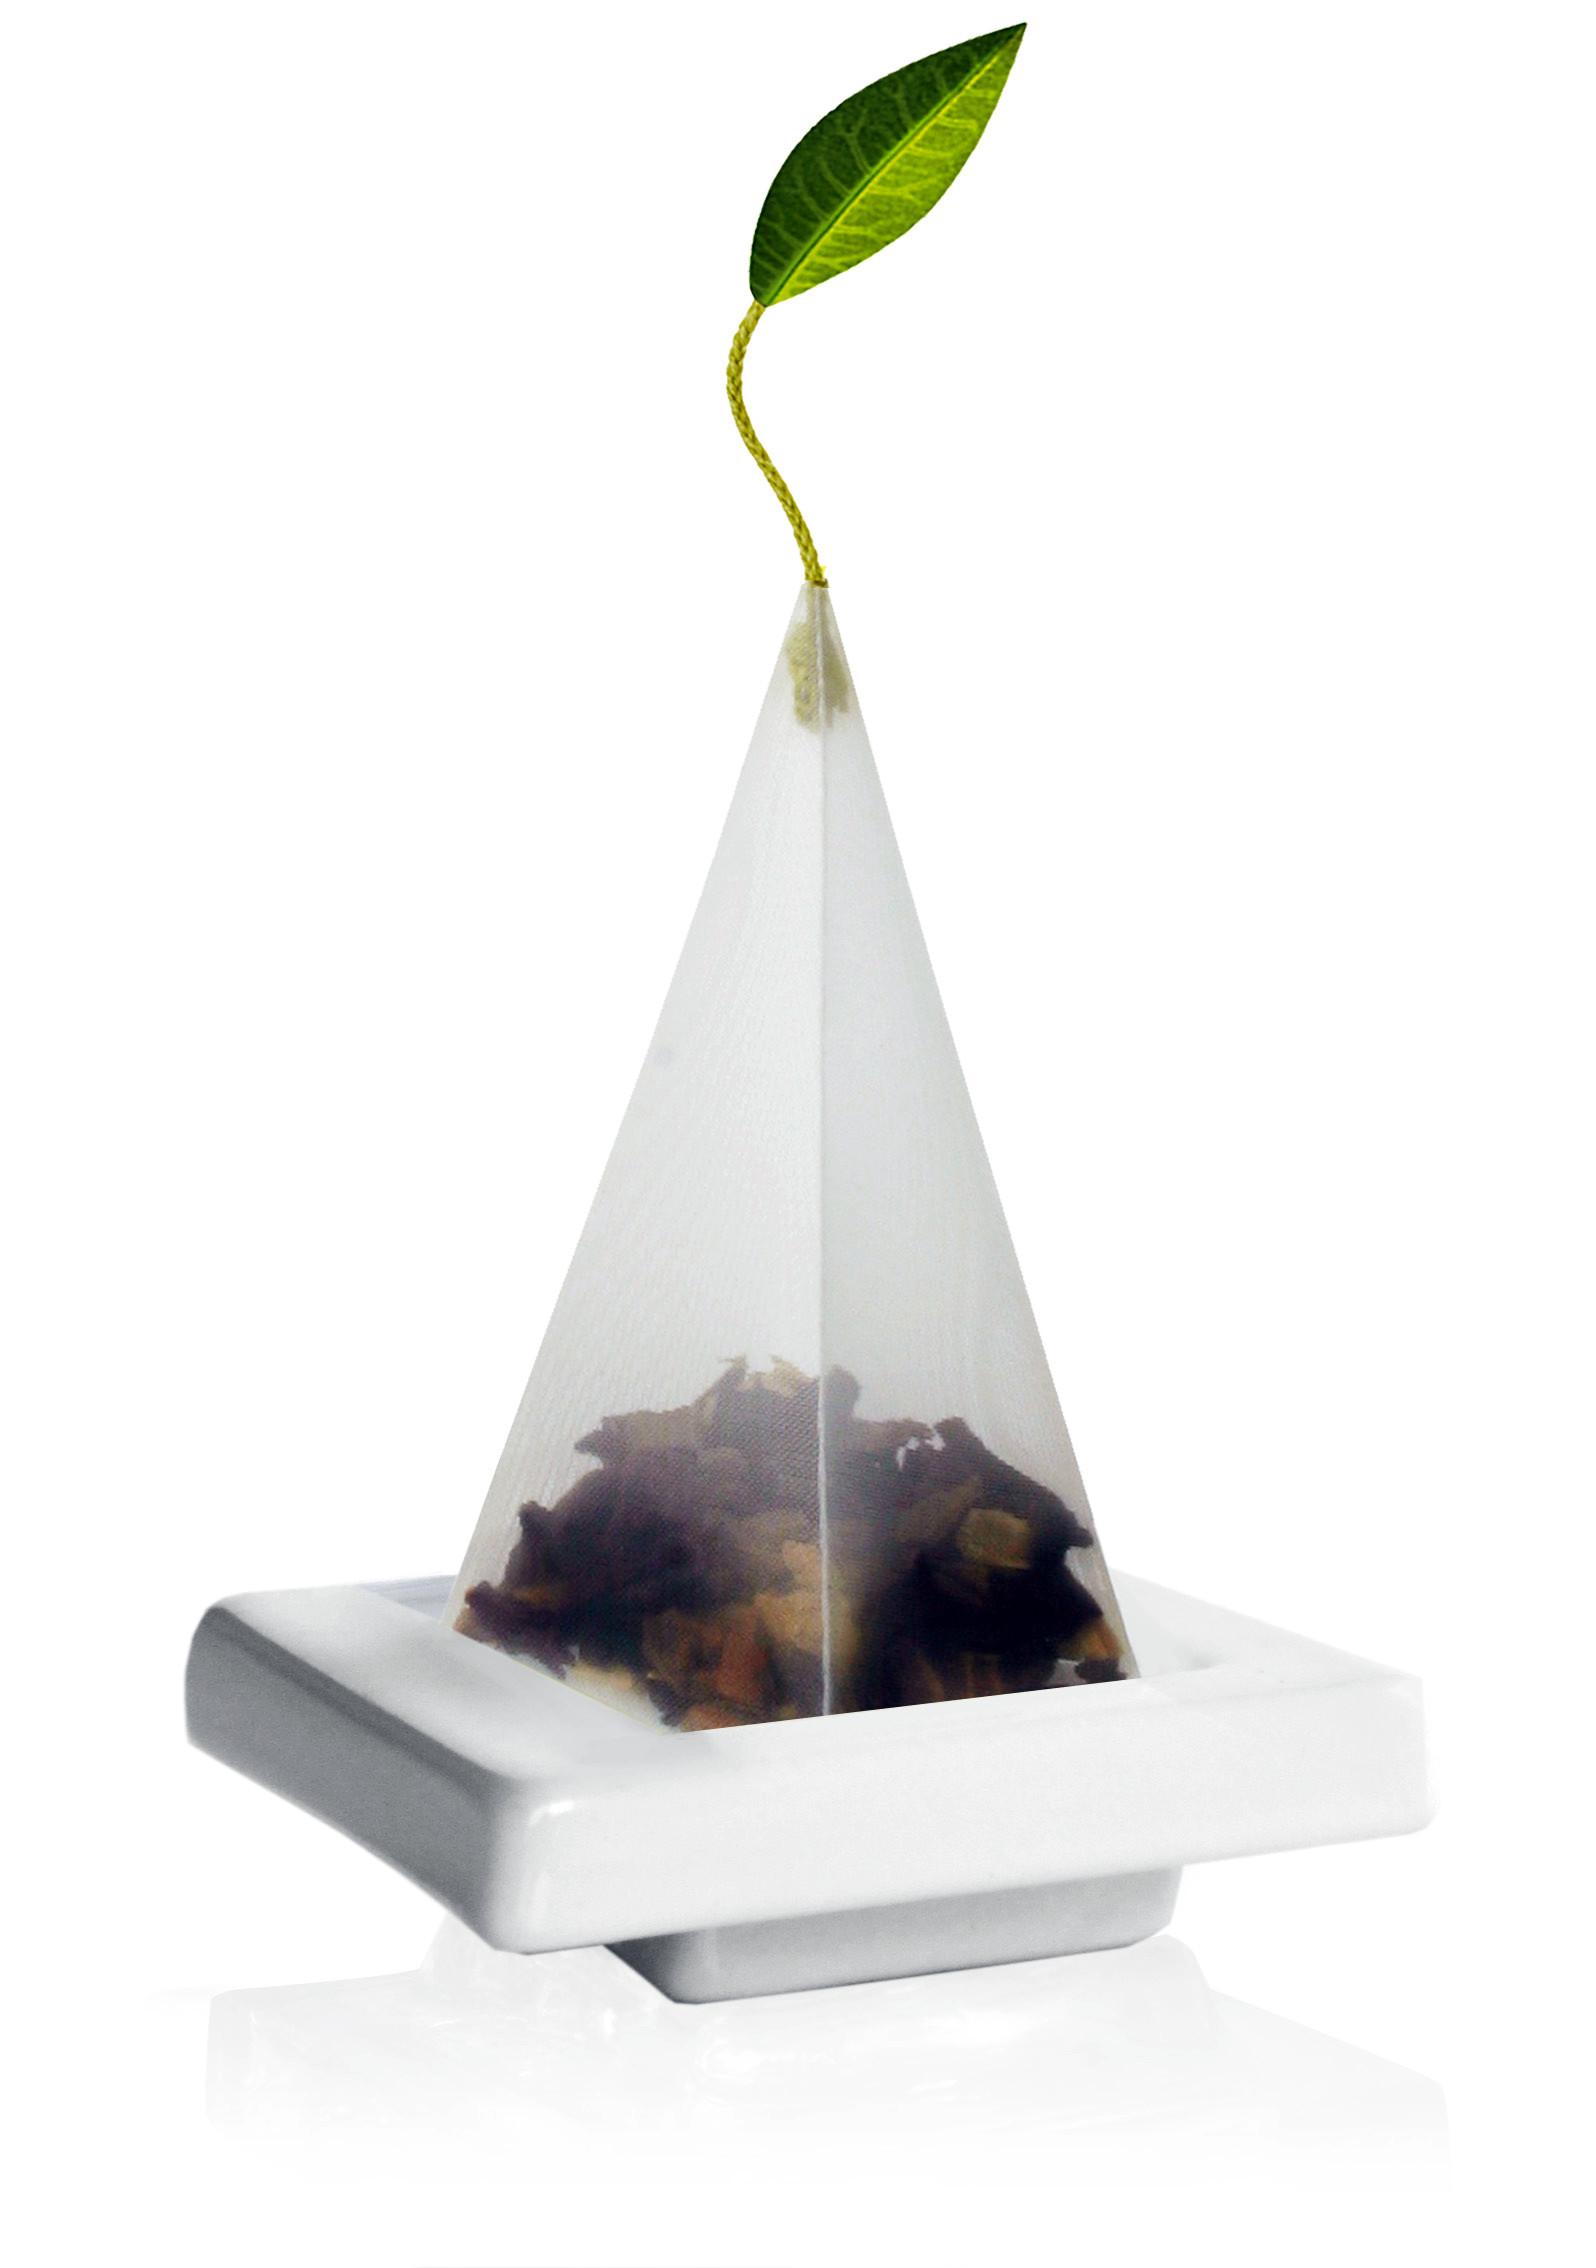 All About Tea Bags - Benefits, Usage, Types, Production, & More